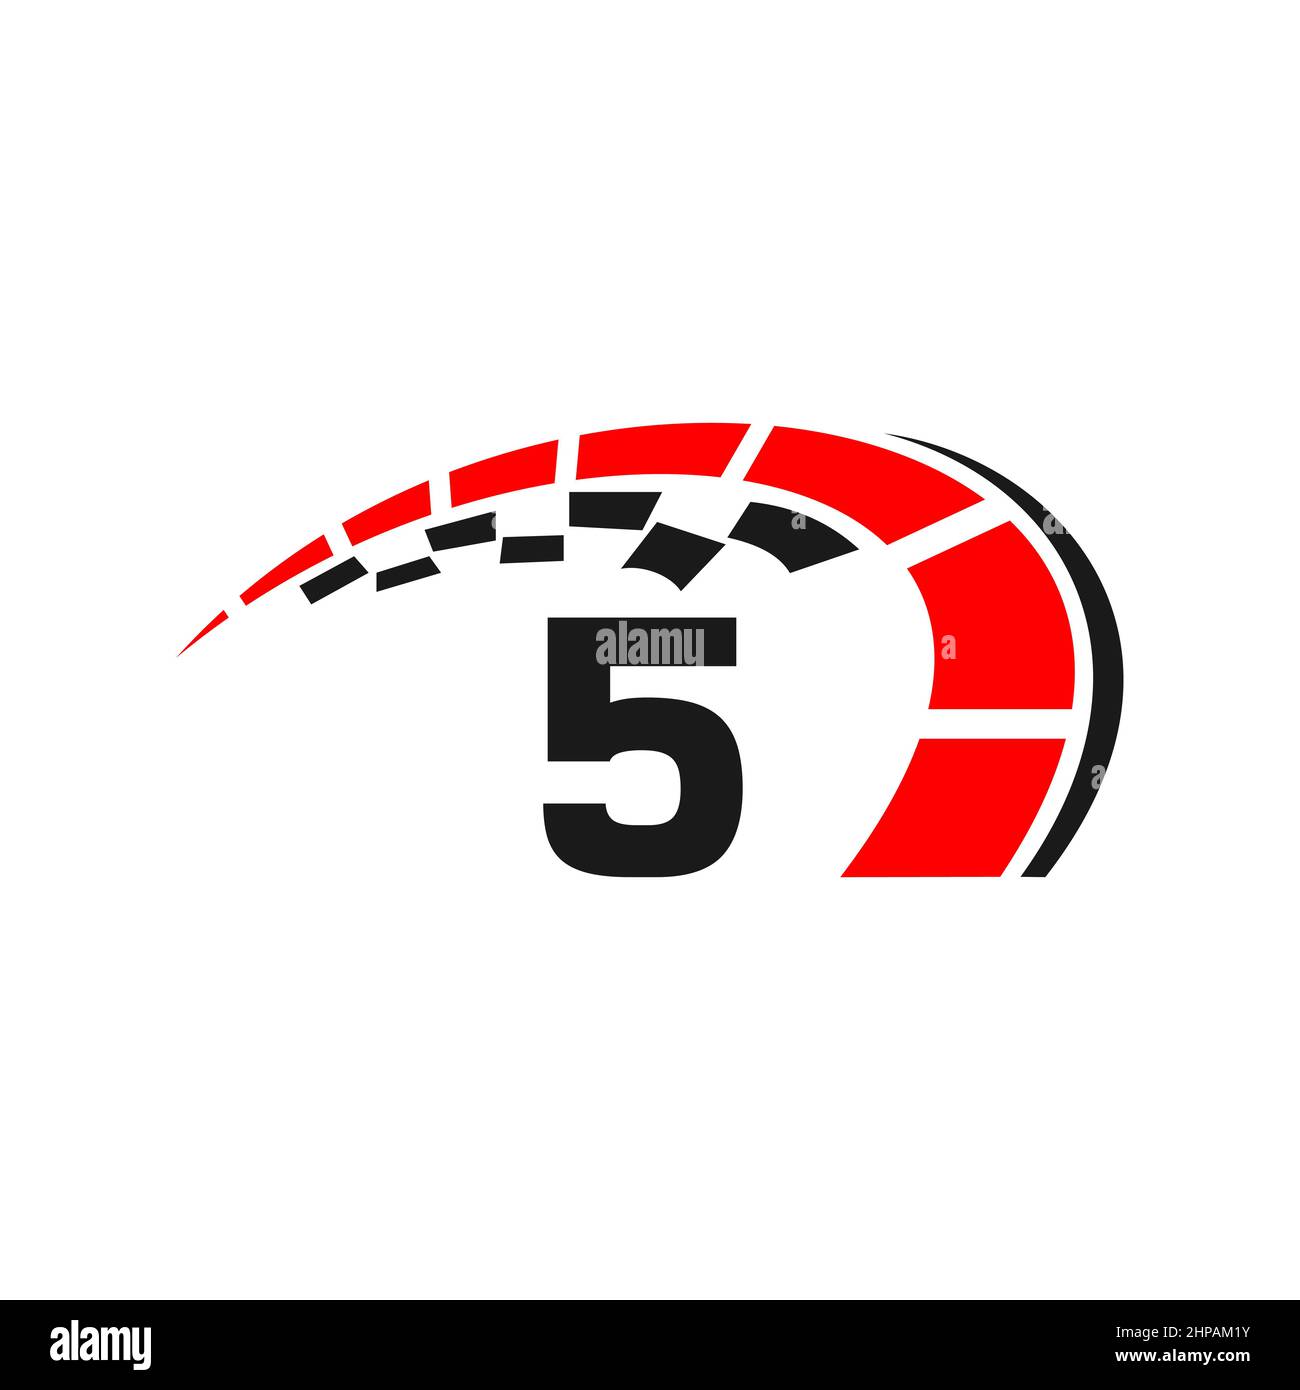 Sport Car Logo On Letter 5 Speed Concept. Car Automotive Template For Cars Service, Cars Repair With Speedometer 5 Letter Logo Design Stock Vector